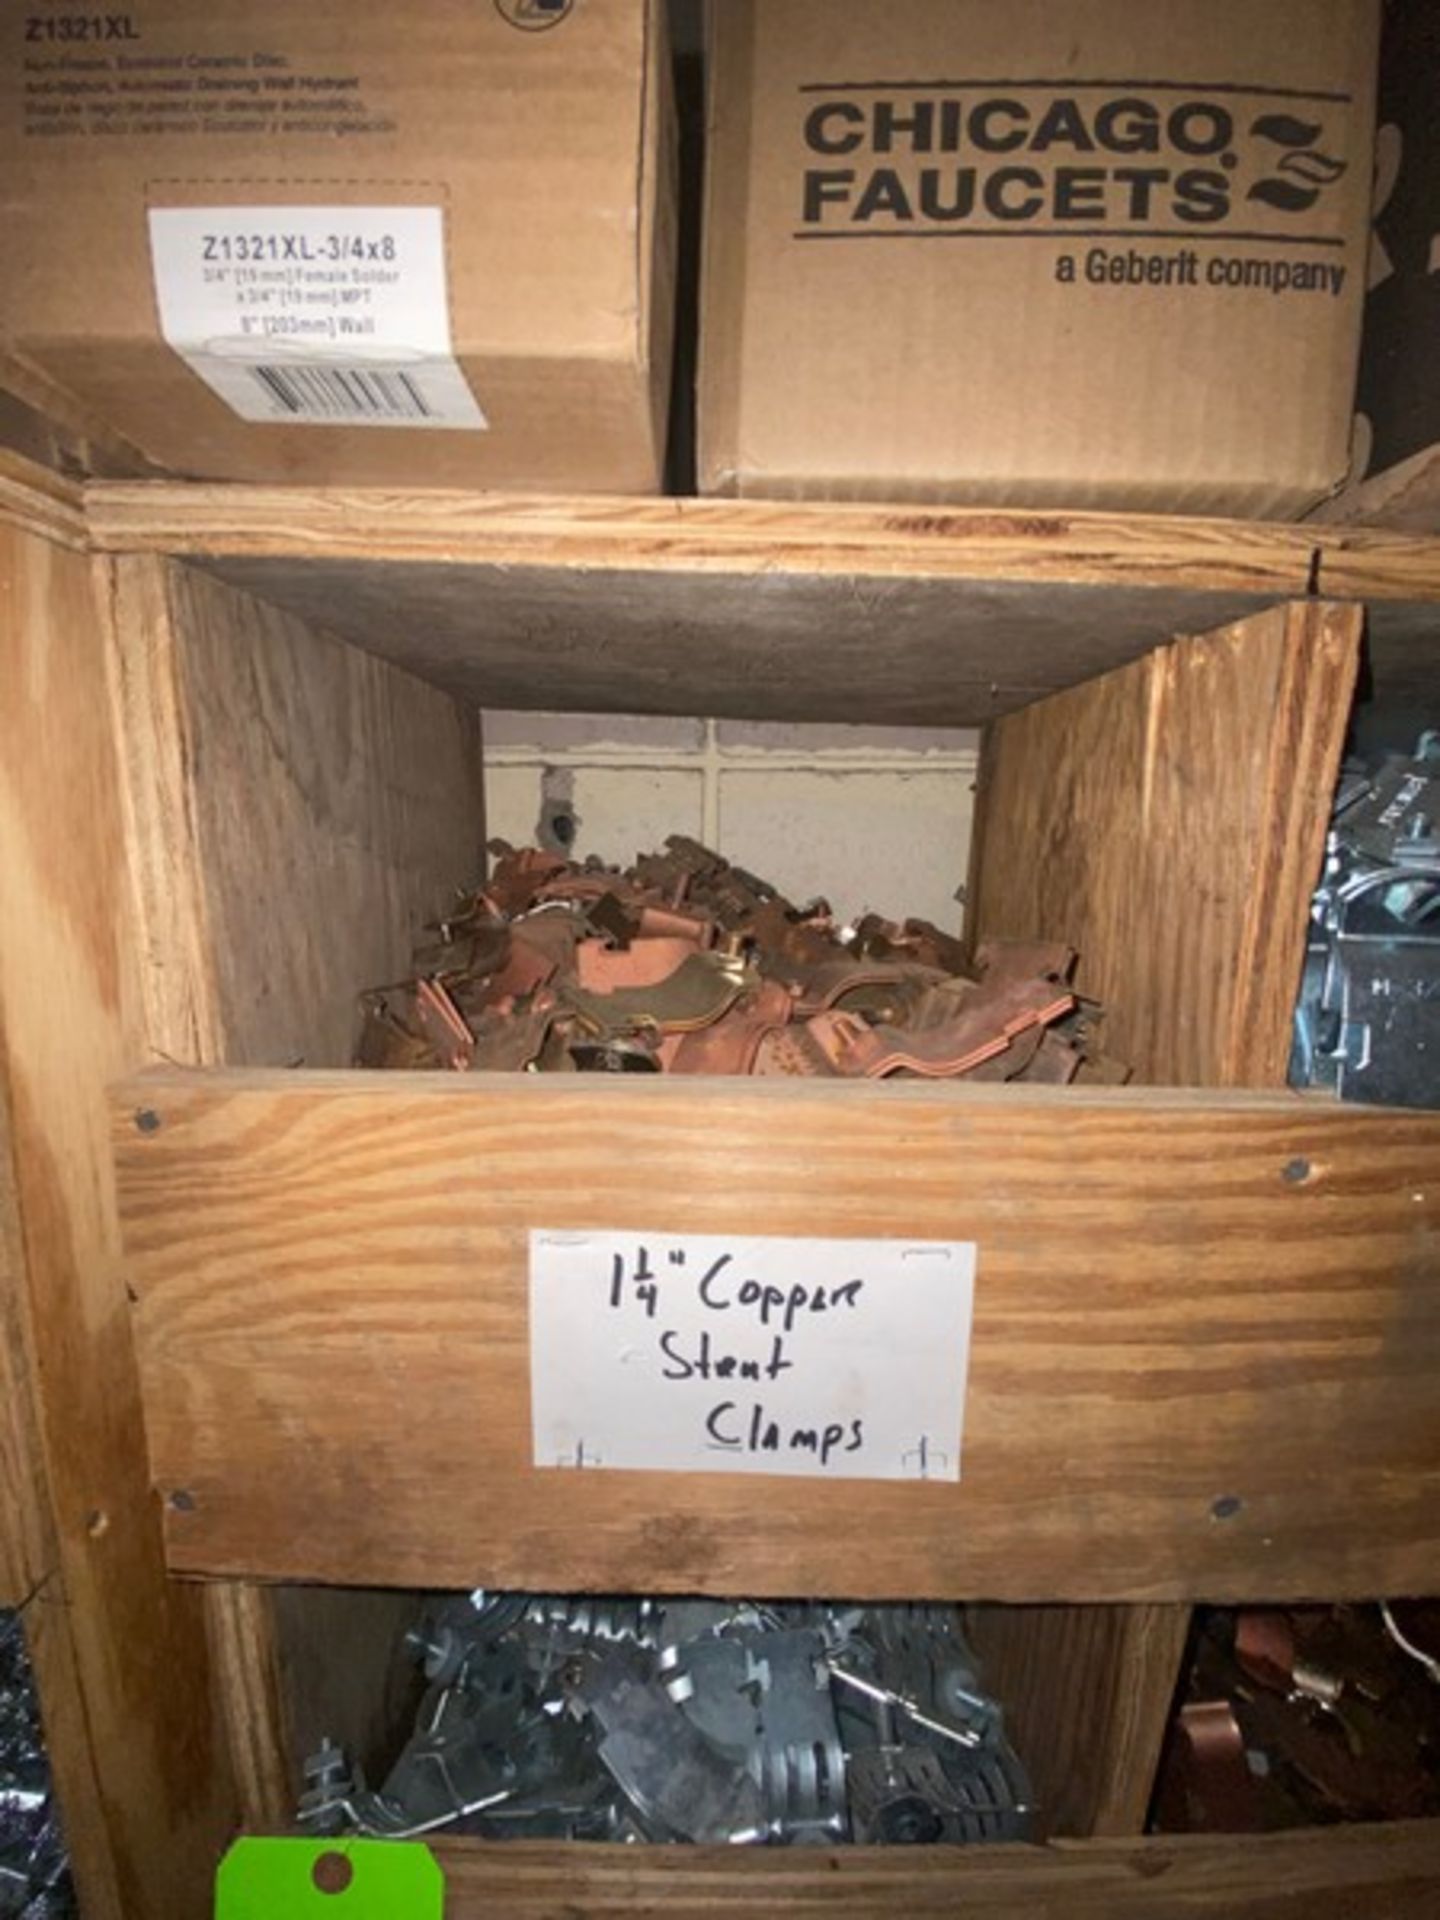 Contents of (25) Cubby's, Includes 1-1/4" Copper Strut Clamps, 3-1/2" Strut Clamps, 4" Copper - Image 4 of 28